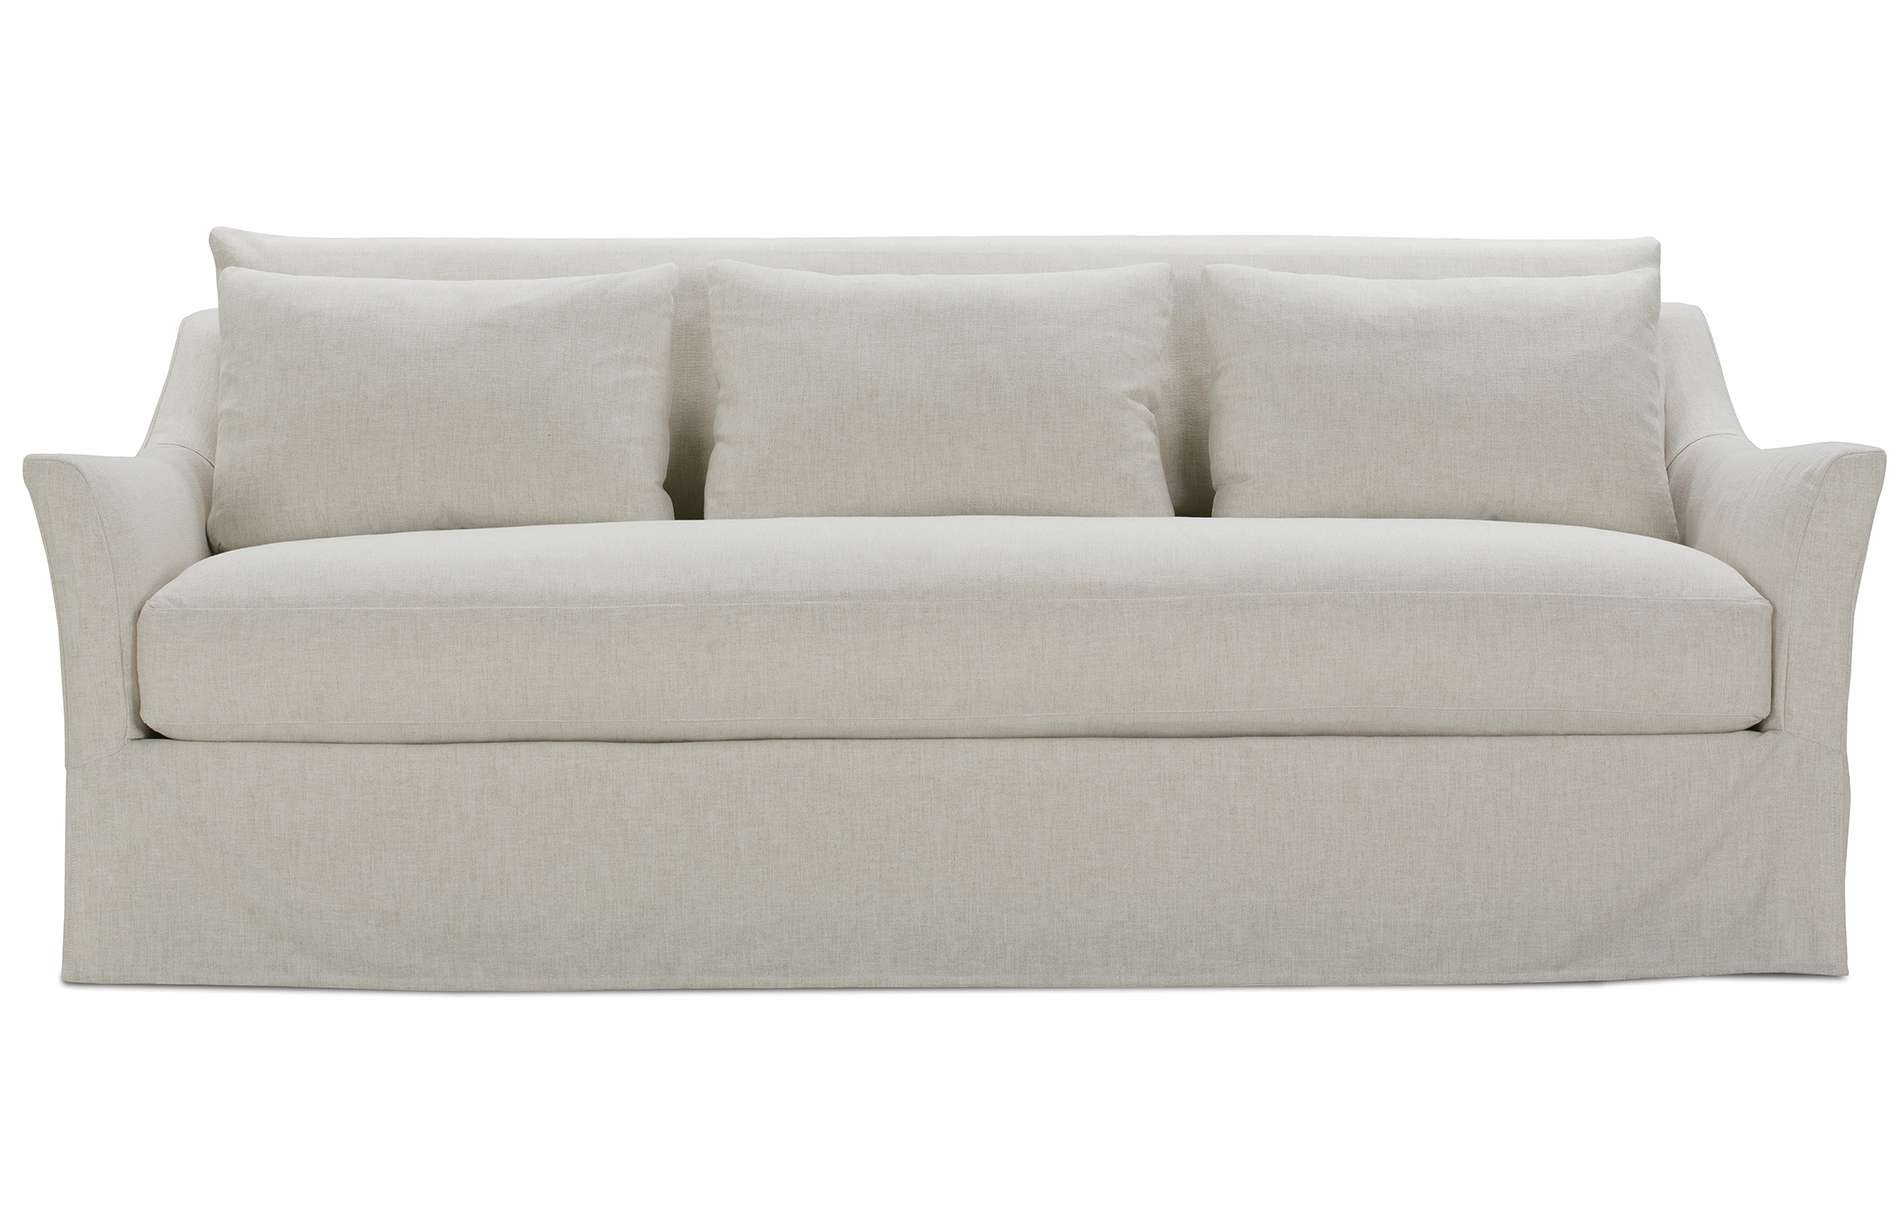 a white couch with four pillows on it